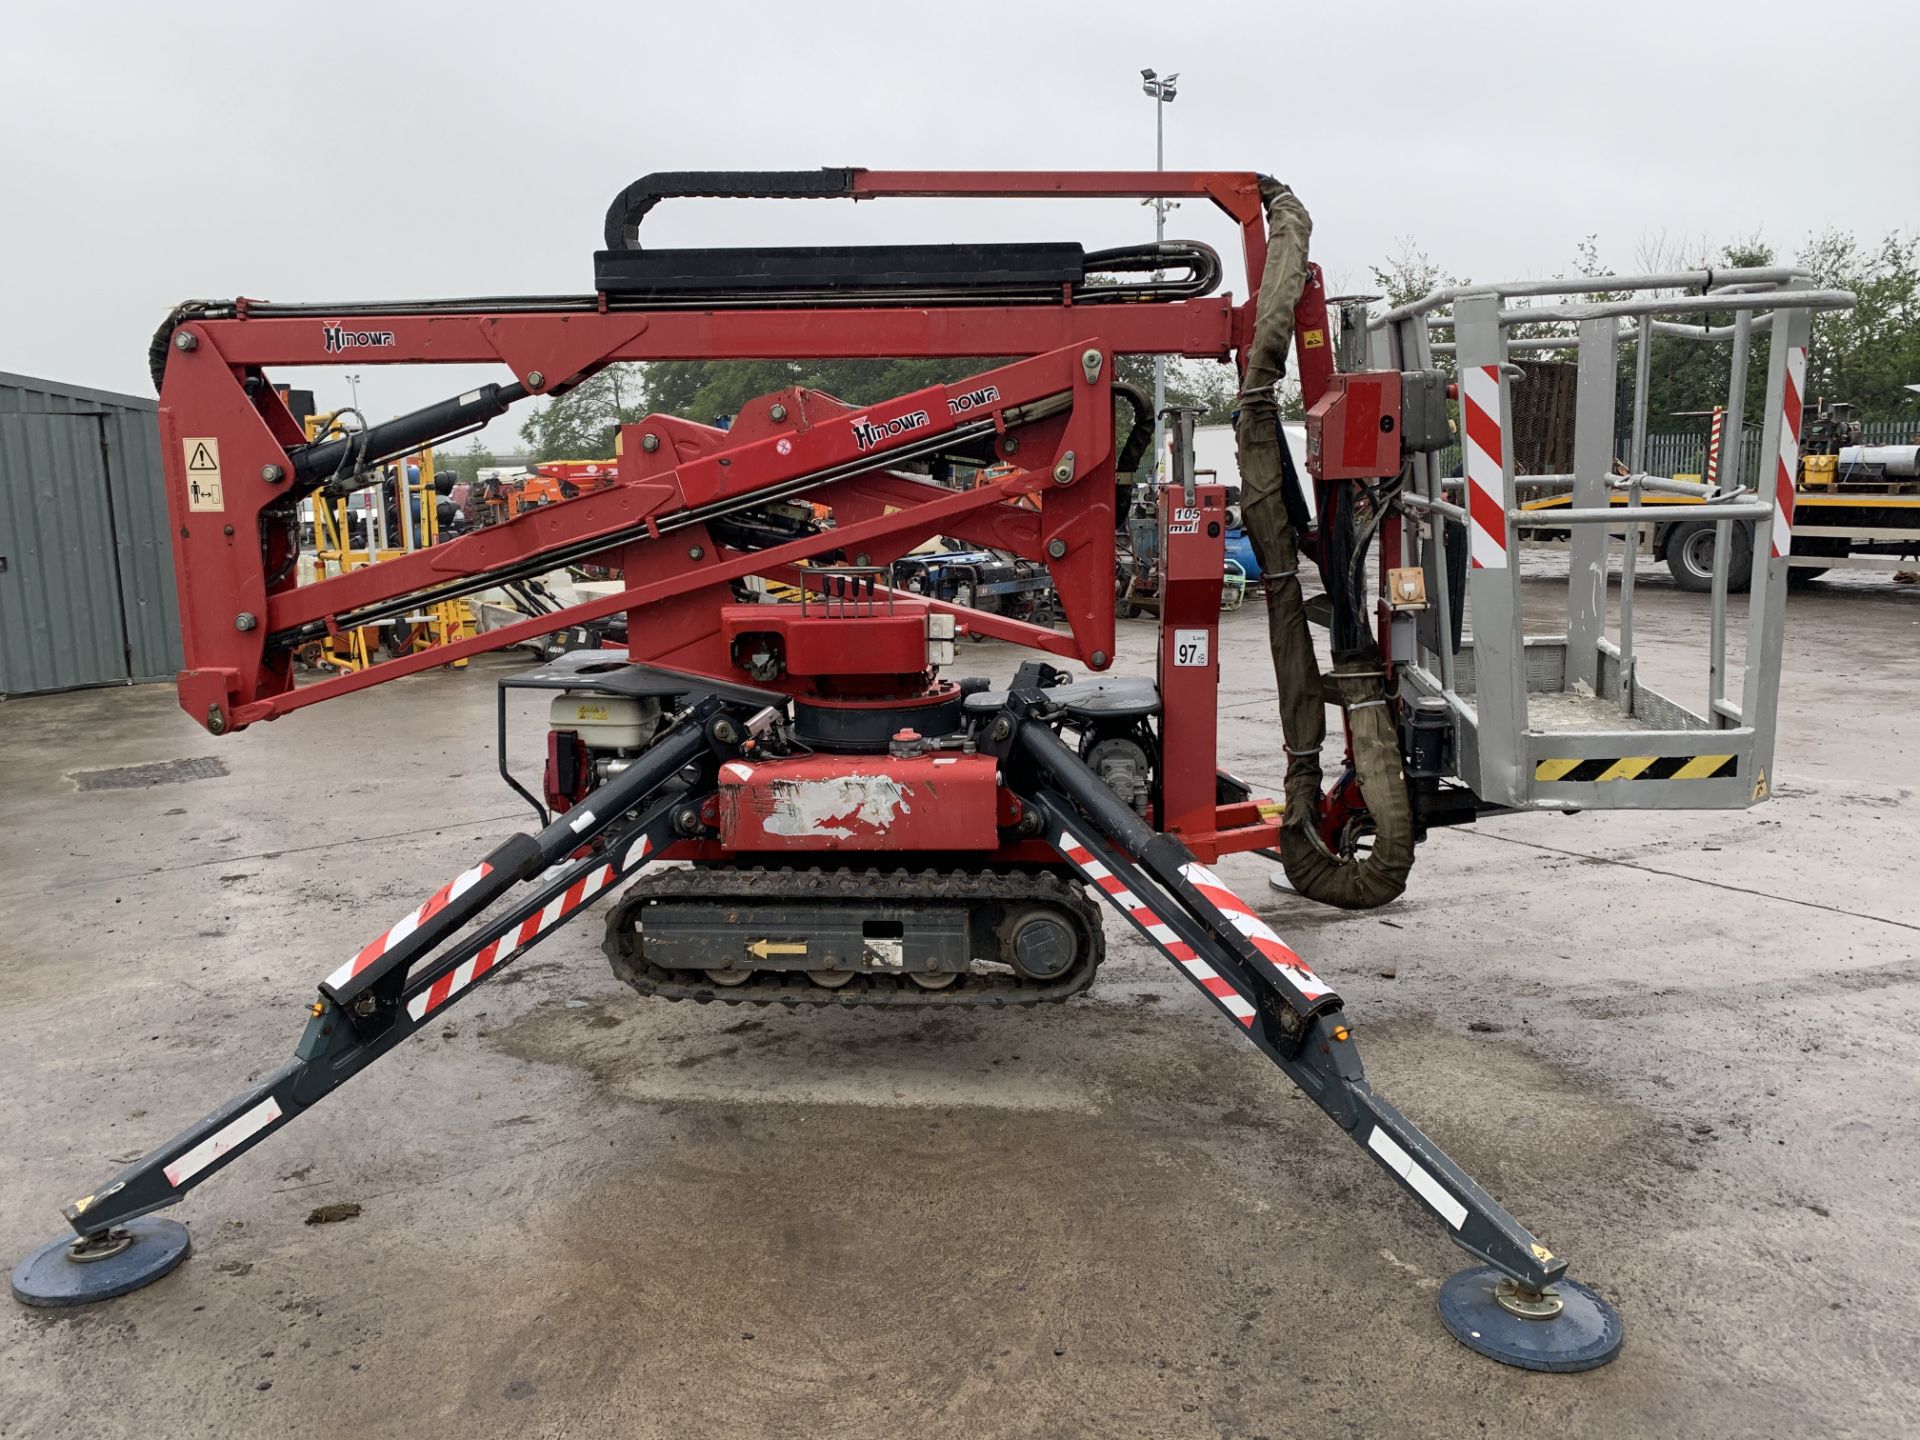 PL-15347 2007 Hinowa Goldlift 1470 Tracked Petrol Articulated Spider Boom Lift c/w Jack Legs & Key S - Image 9 of 25